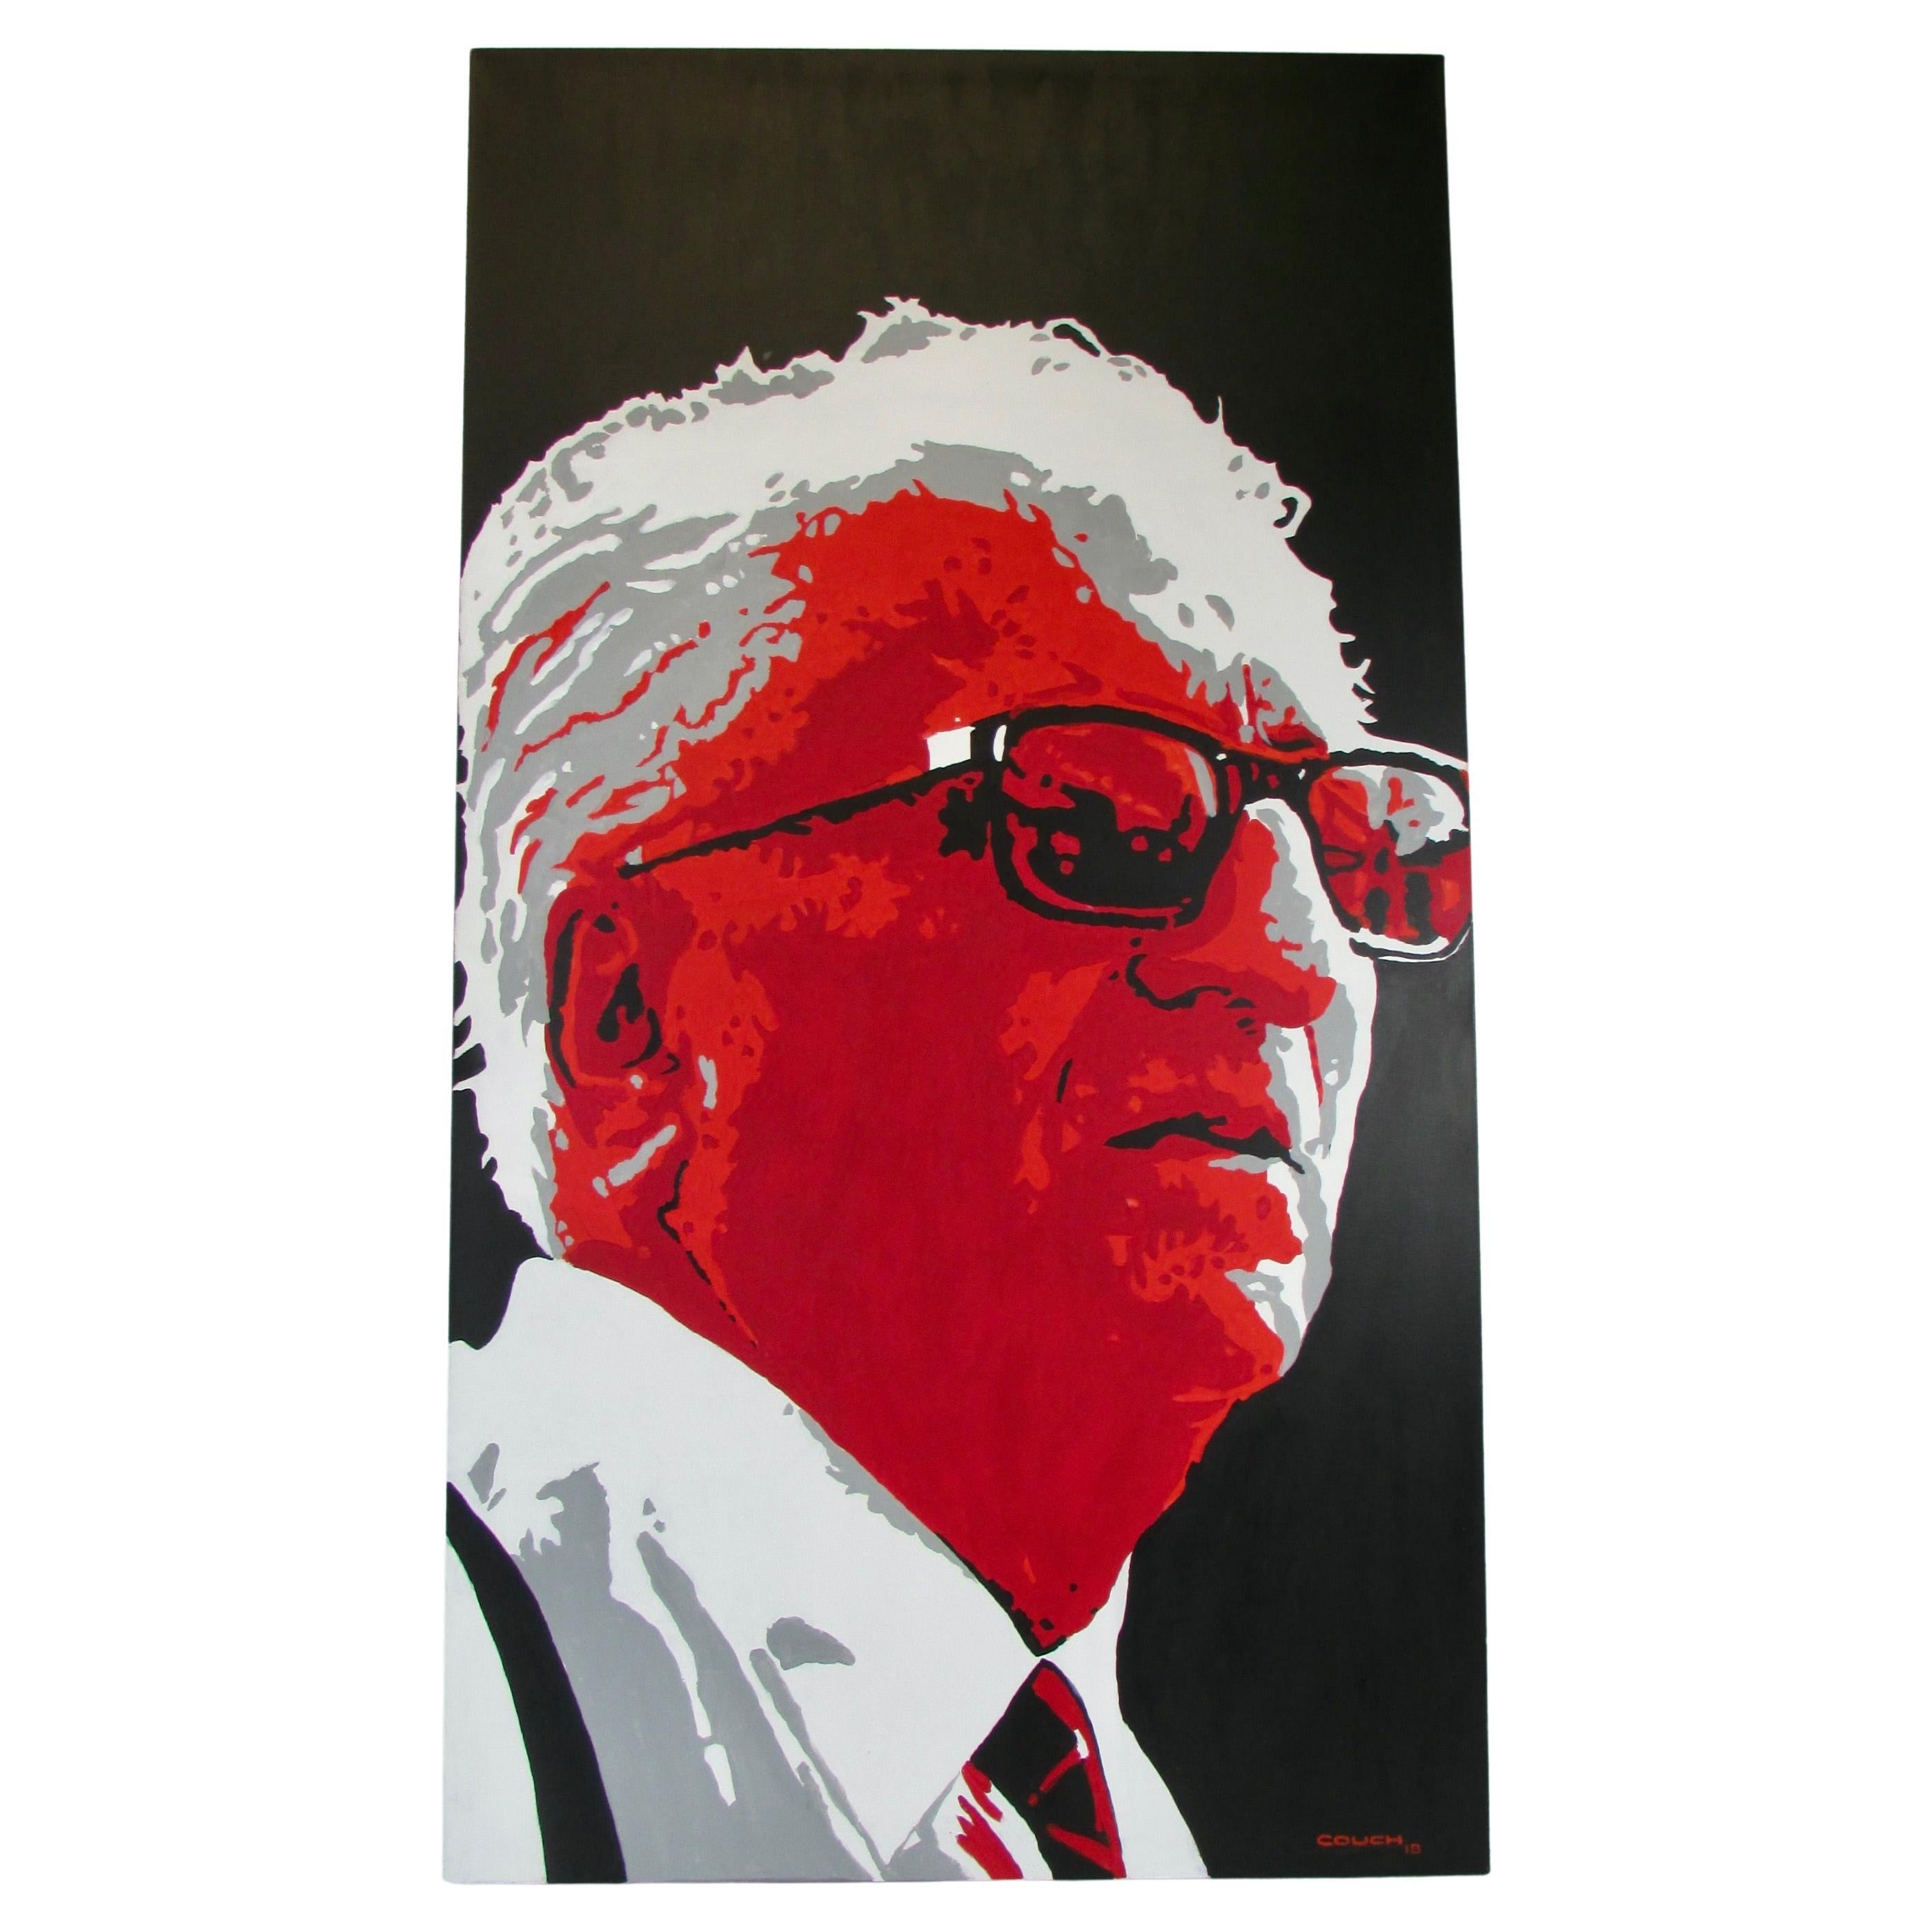 Large Detroit Artist Billy Couch Acrylic on Canvas Painting of Enzo Ferrari